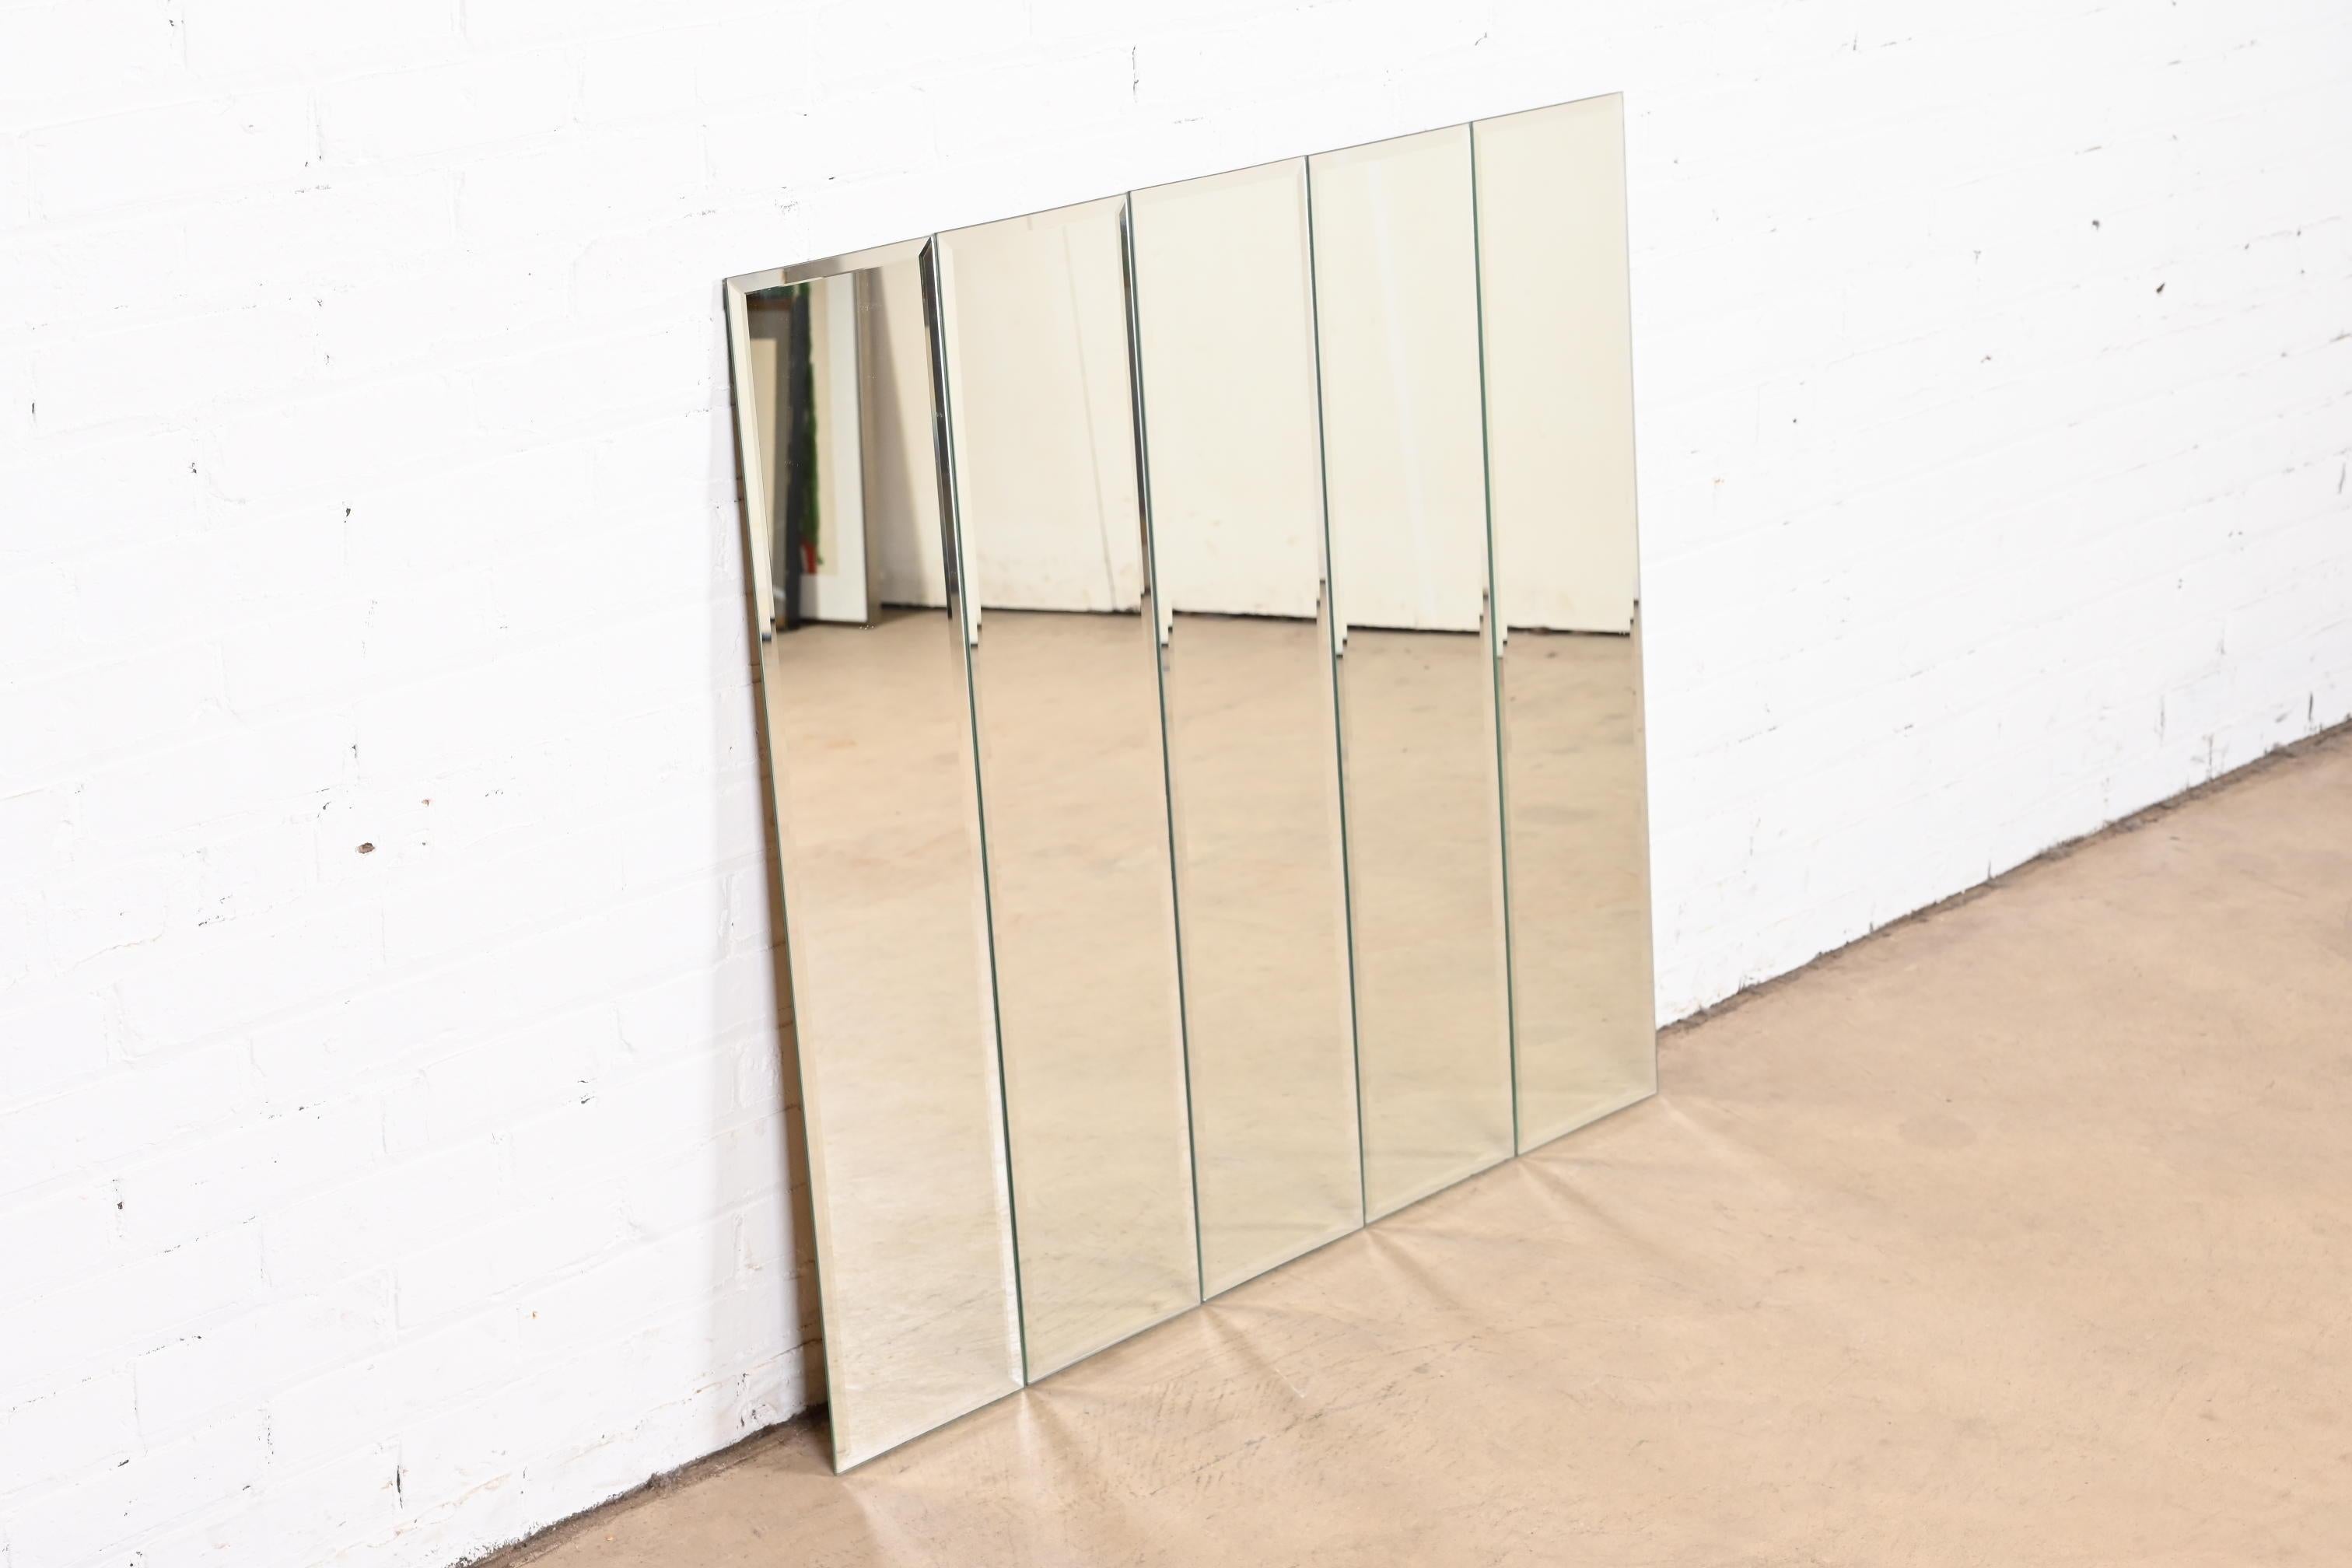 American Mid-Century Modern Five-Panel Beveled Wall Mirror, 1970s For Sale